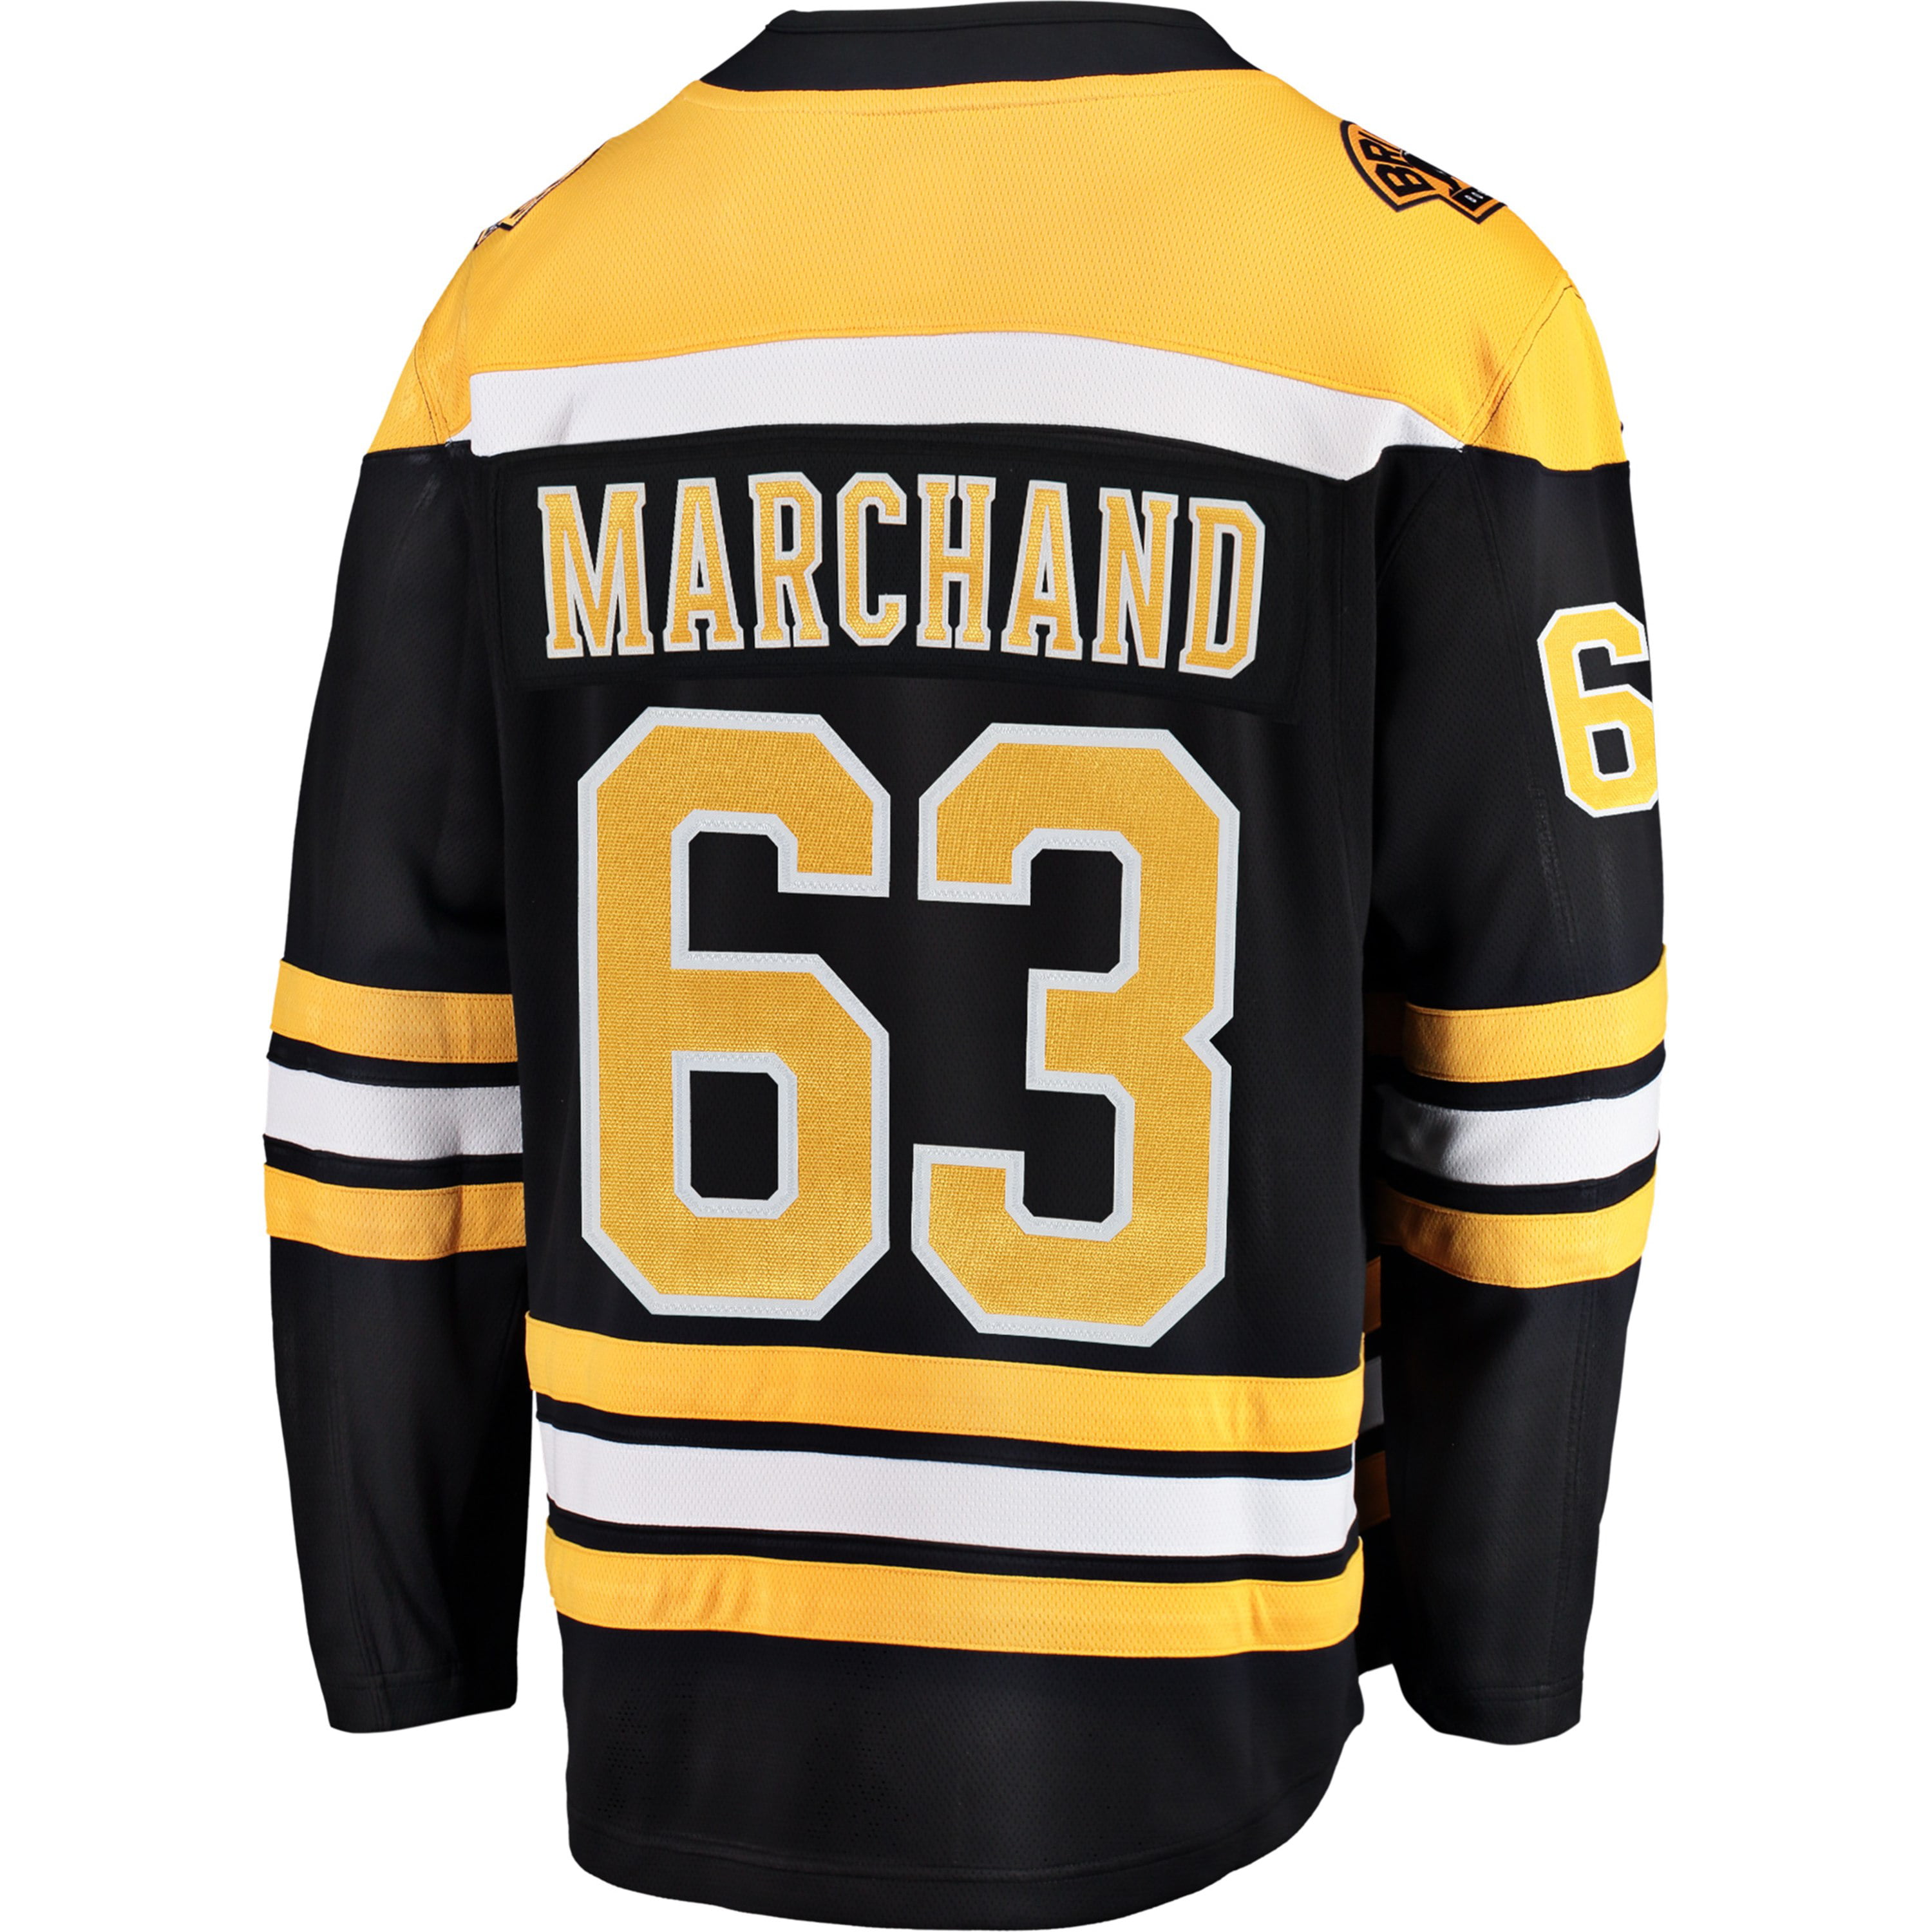 brad marchand canada jersey